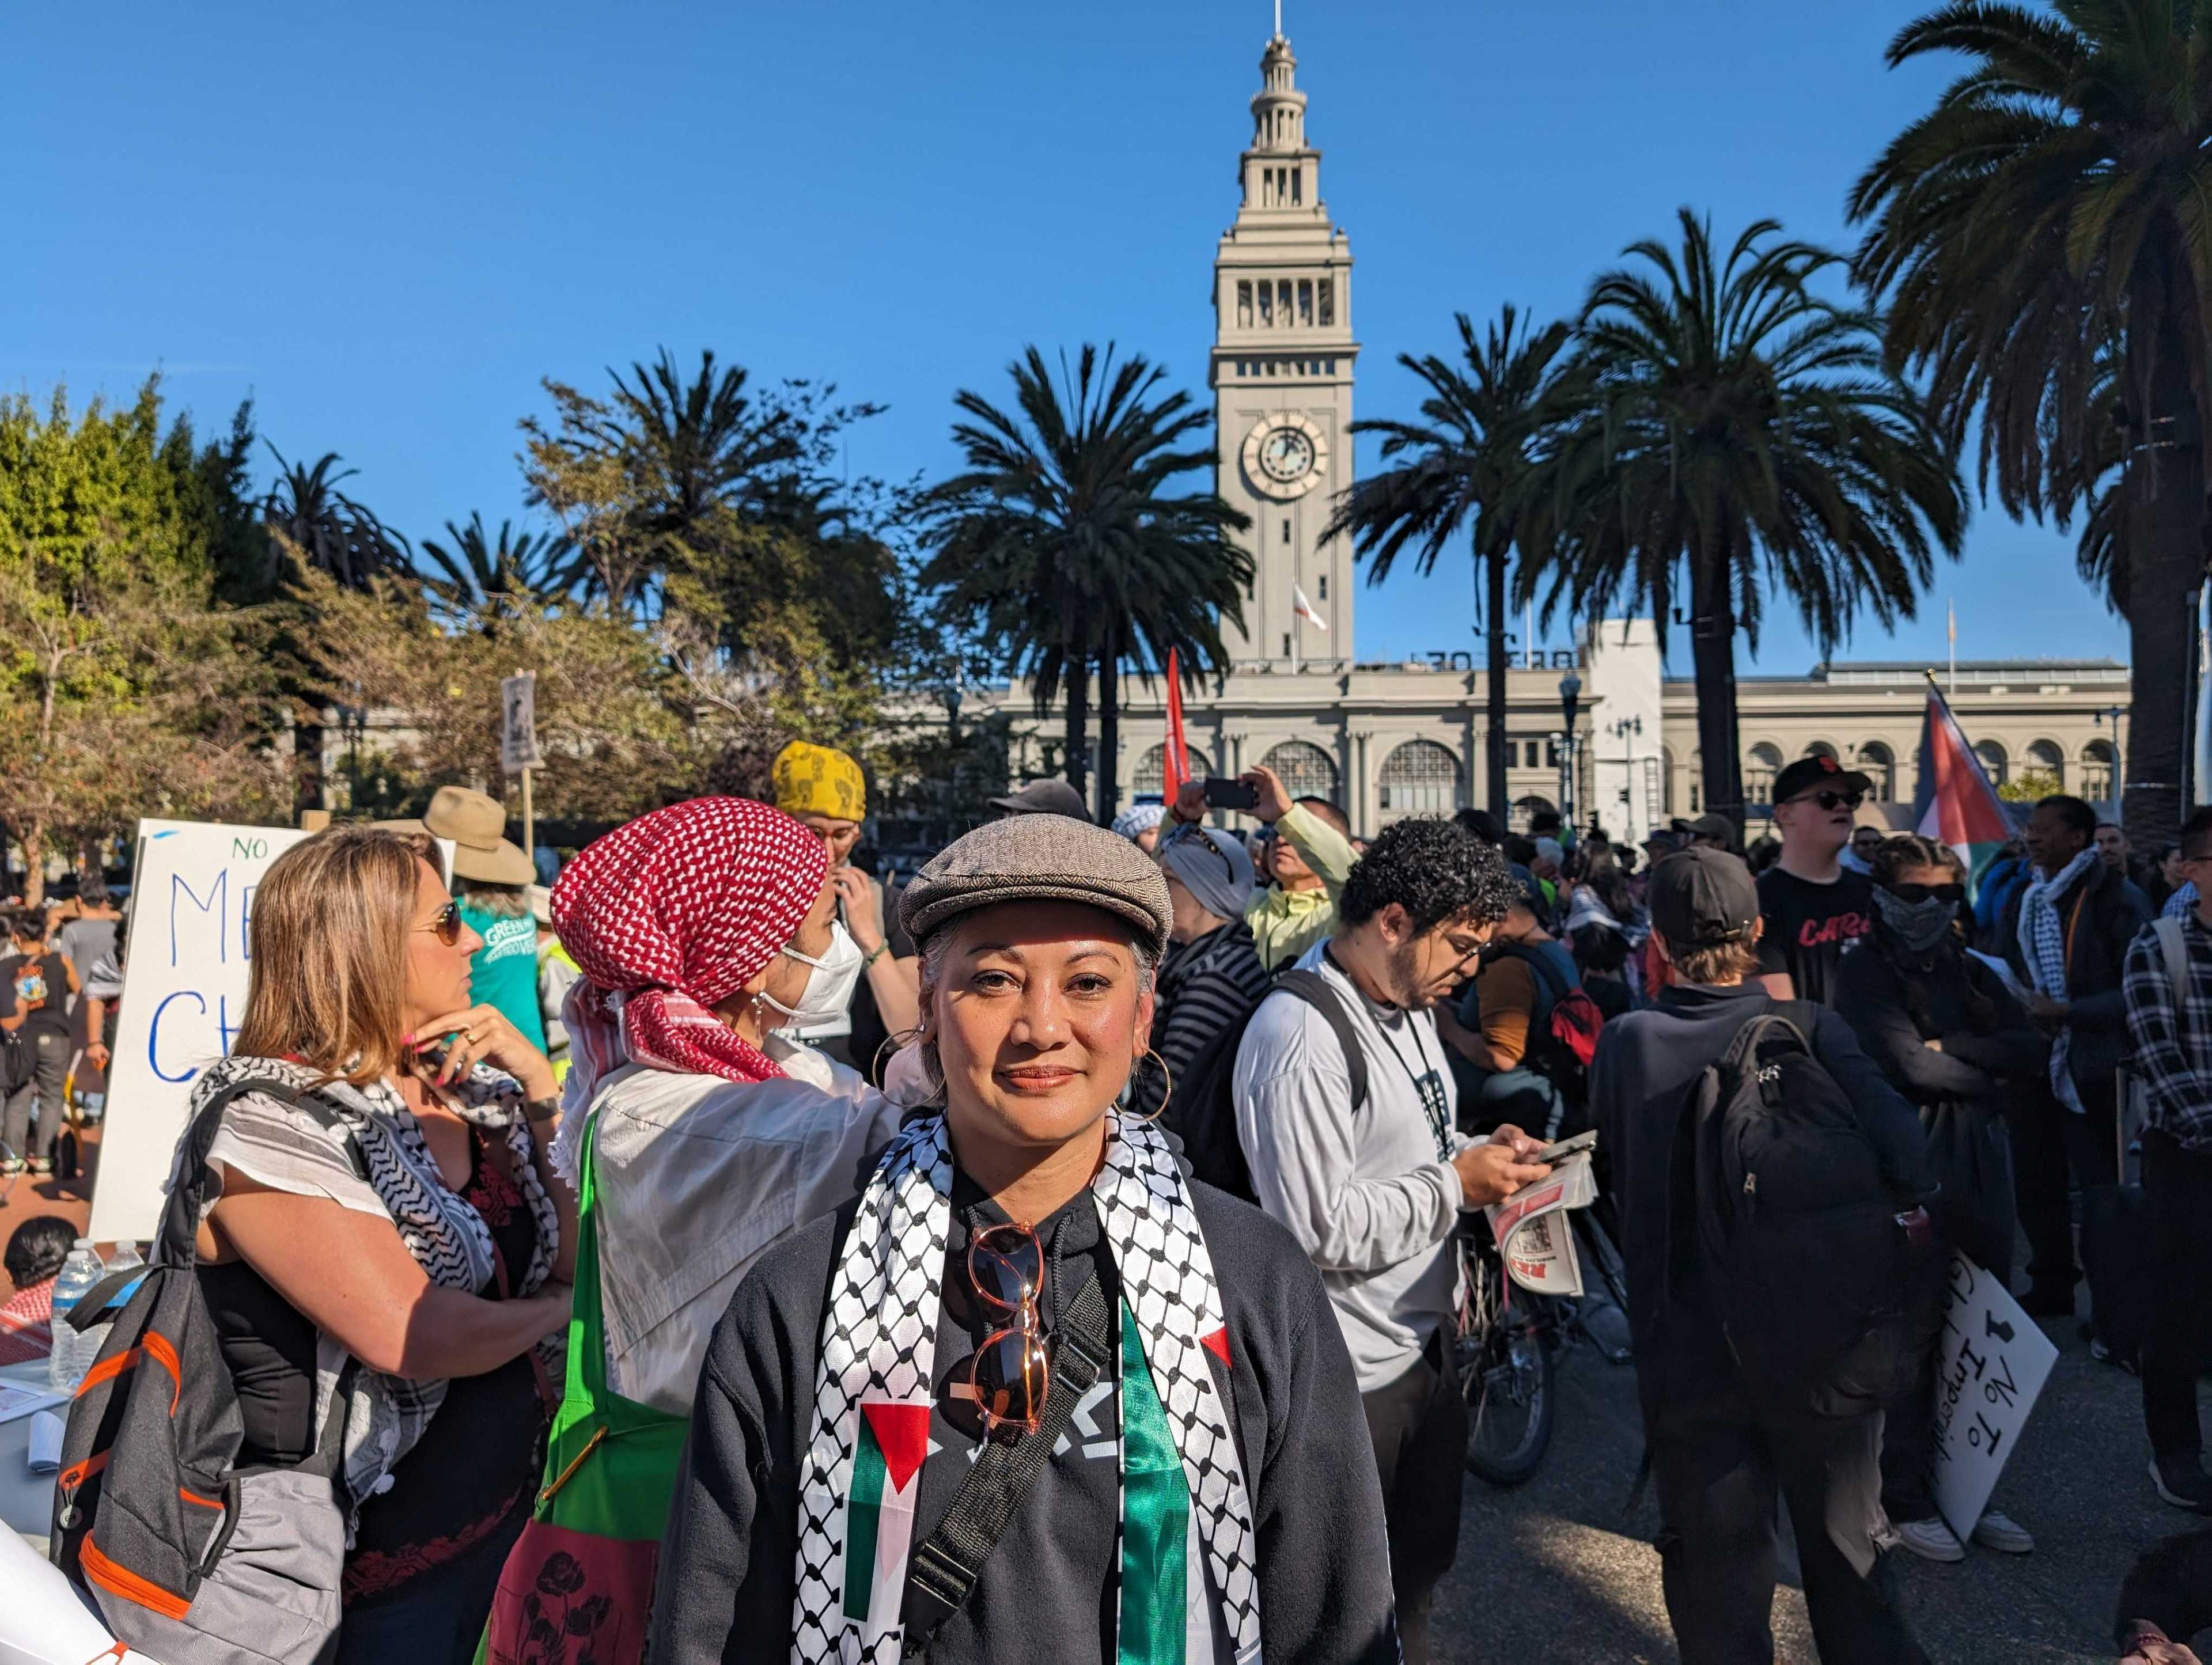 A woman in a hat and scarf smiles alongside protesters outside under blue skies and palm trees. 